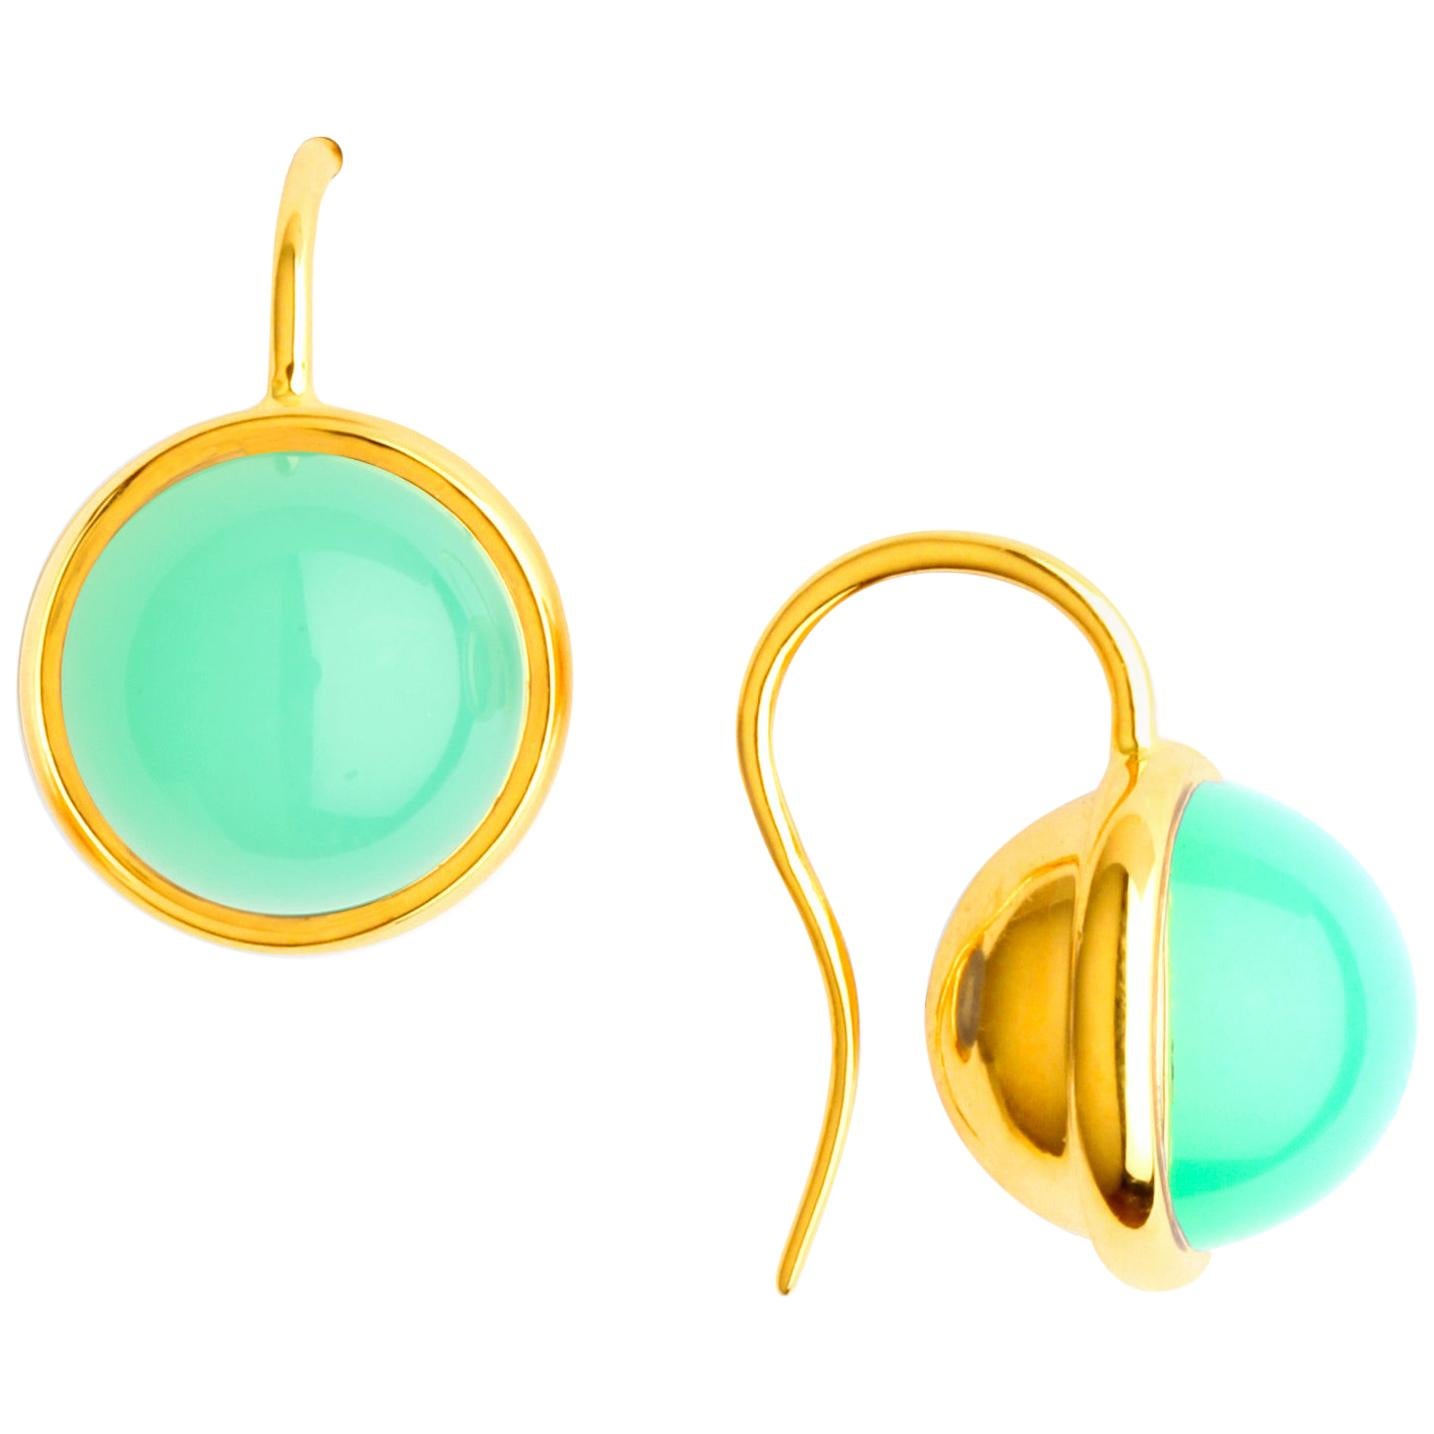 Syna Yellow Gold Chrysoprase Baubles Earrings